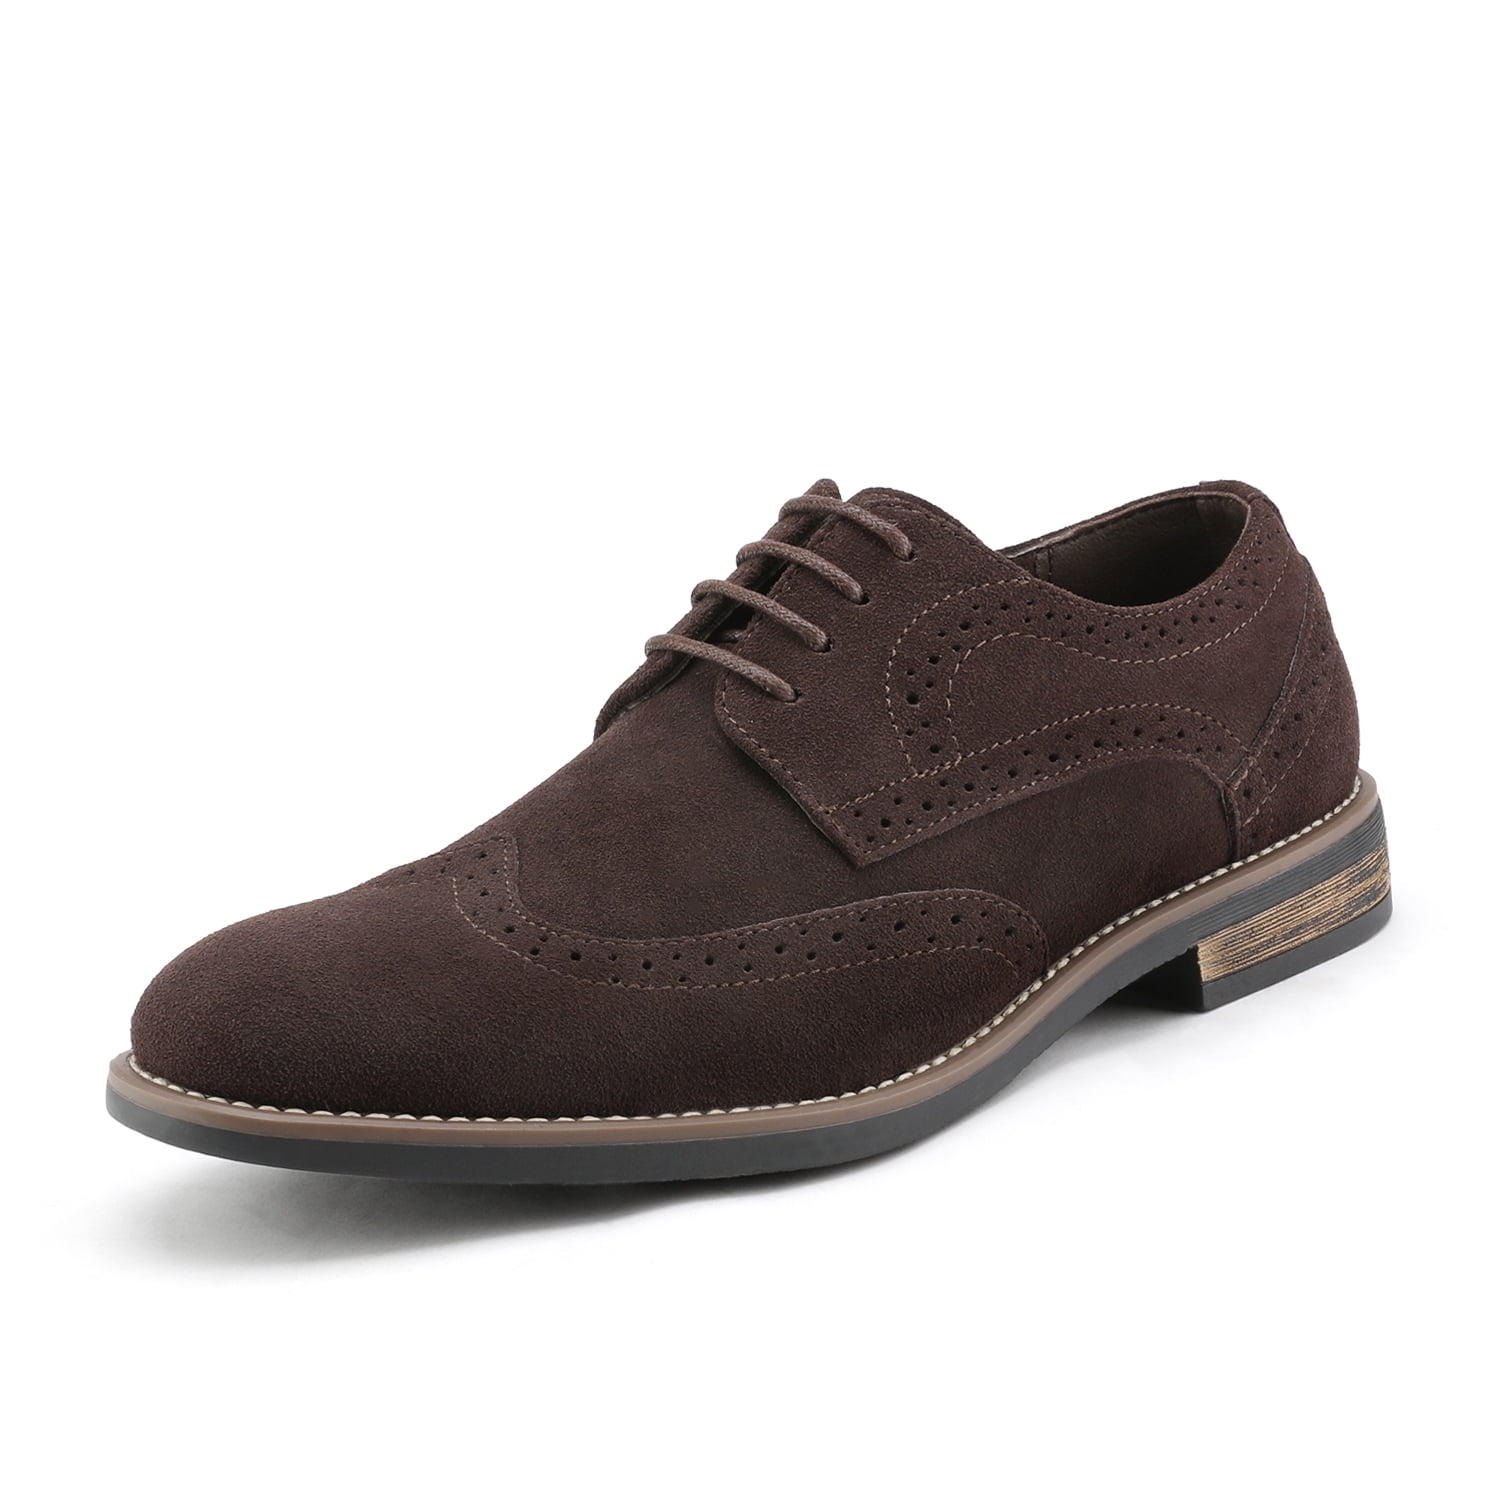 Red Tape Carn Tan Leather & Suede Tan Navy Mens Brogue Shoes 